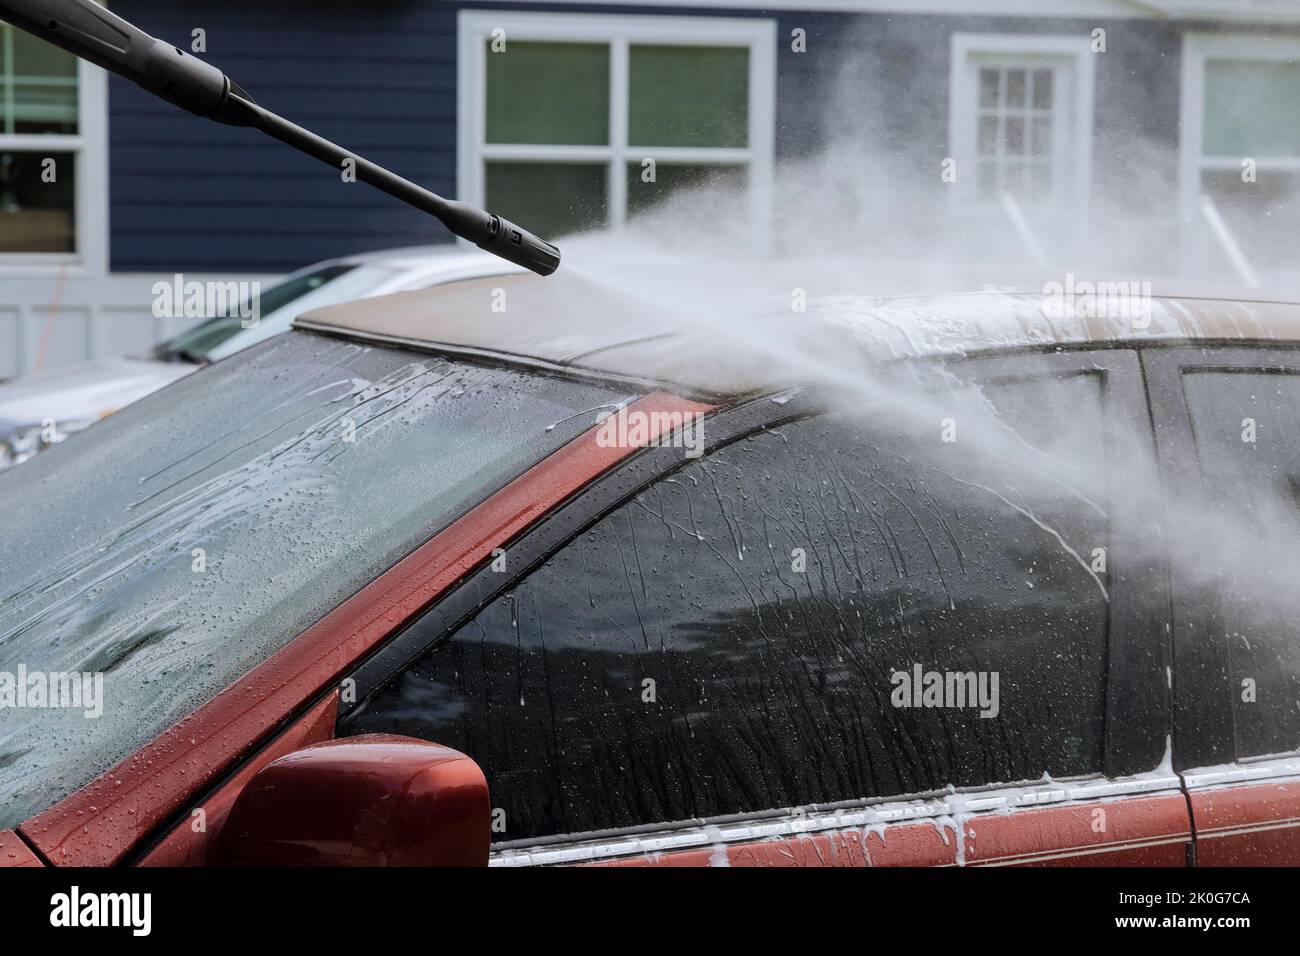 During the washing of a car, a man sprays water with high pressure jets to clean the vehicle Stock Photo